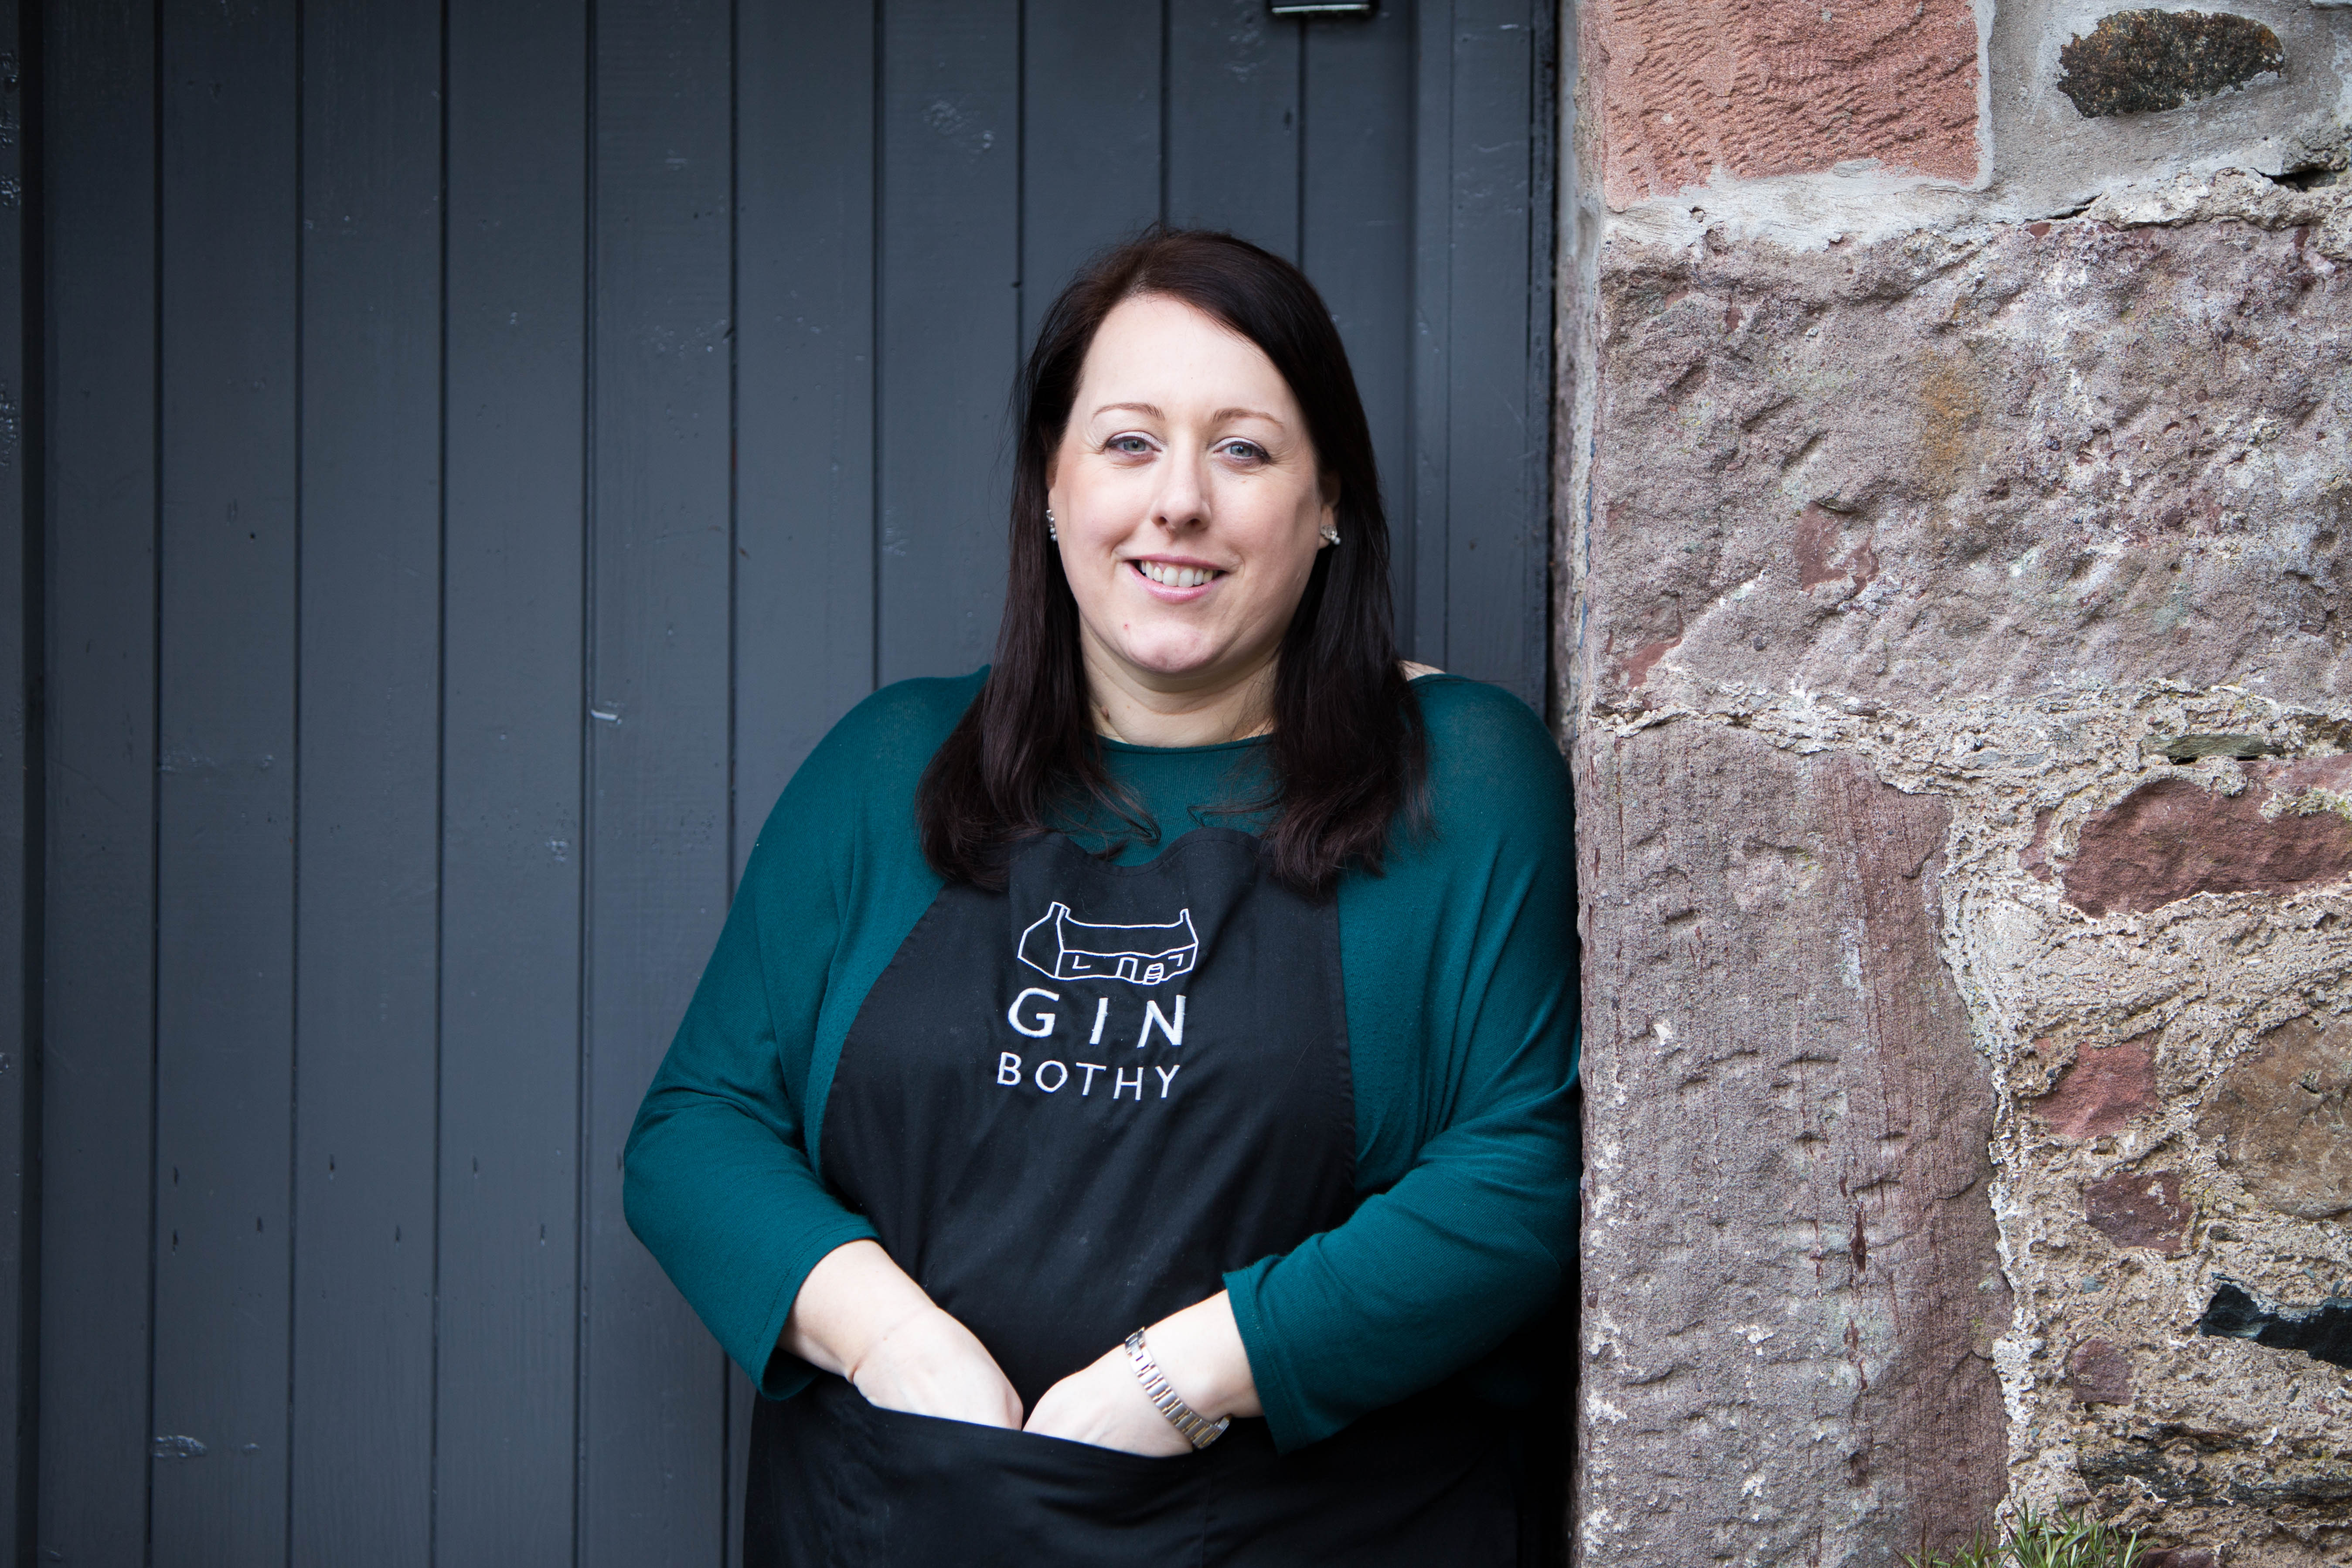 Gin Bothy expands its network over the Atlantic with American Total Wine & More deal